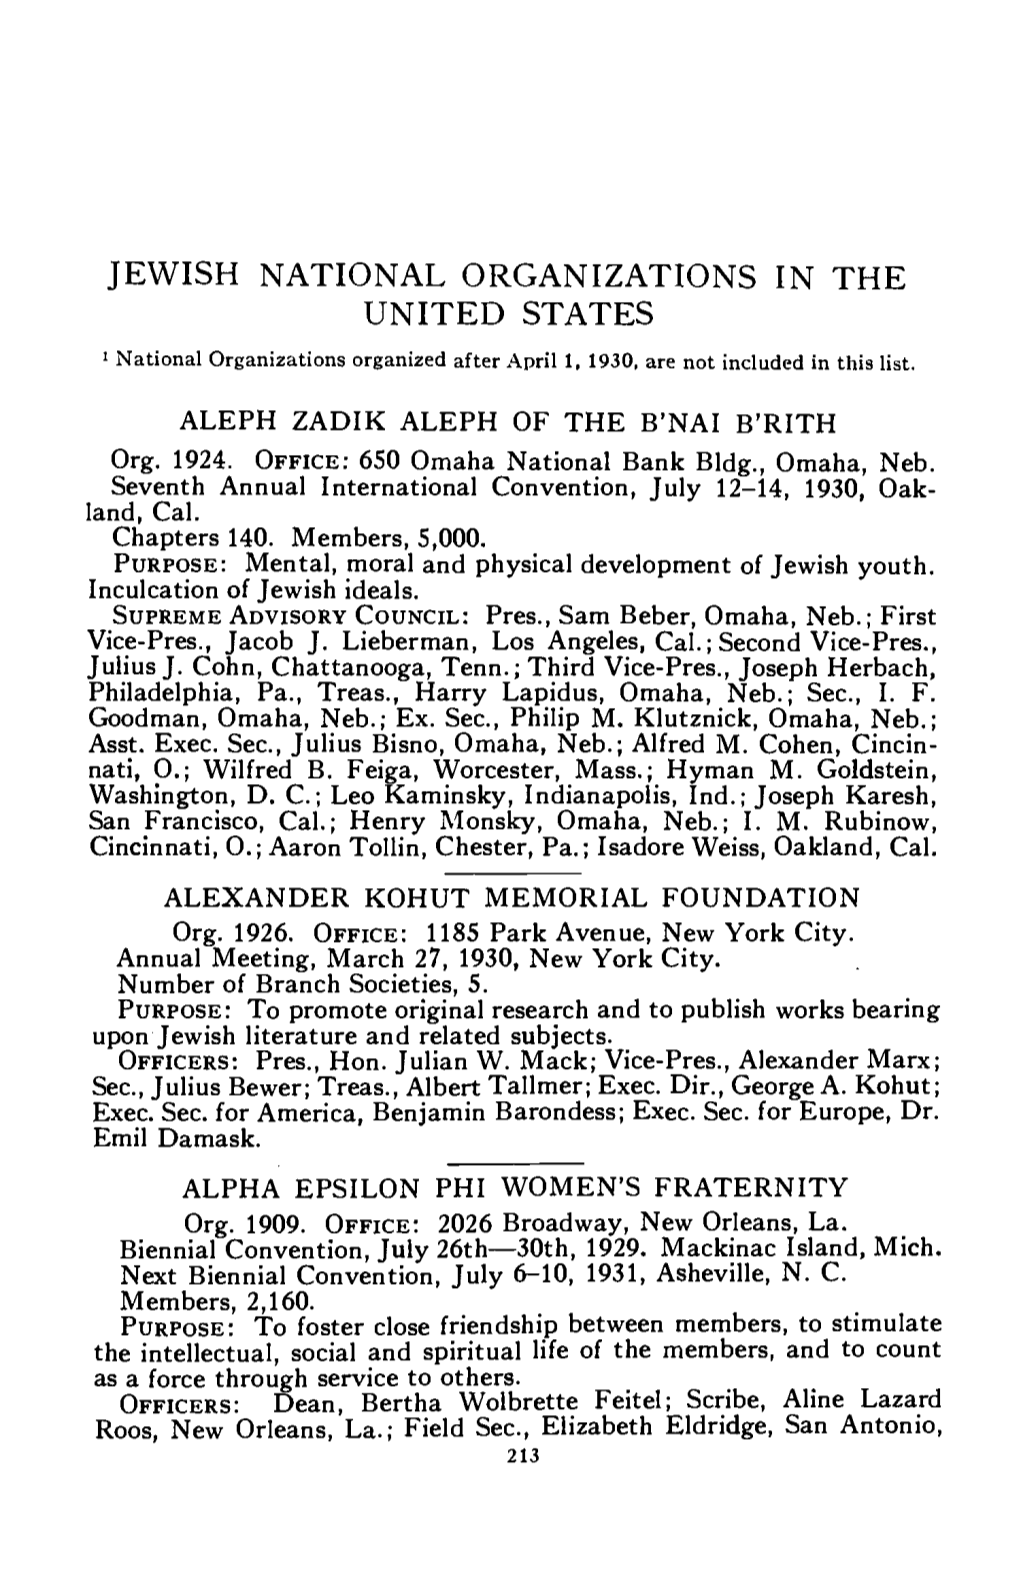 JEWISH NATIONAL ORGANIZATIONS in the UNITED STATES 1 National Organizations Organized After April 1, 1930, Are Not Included in This List